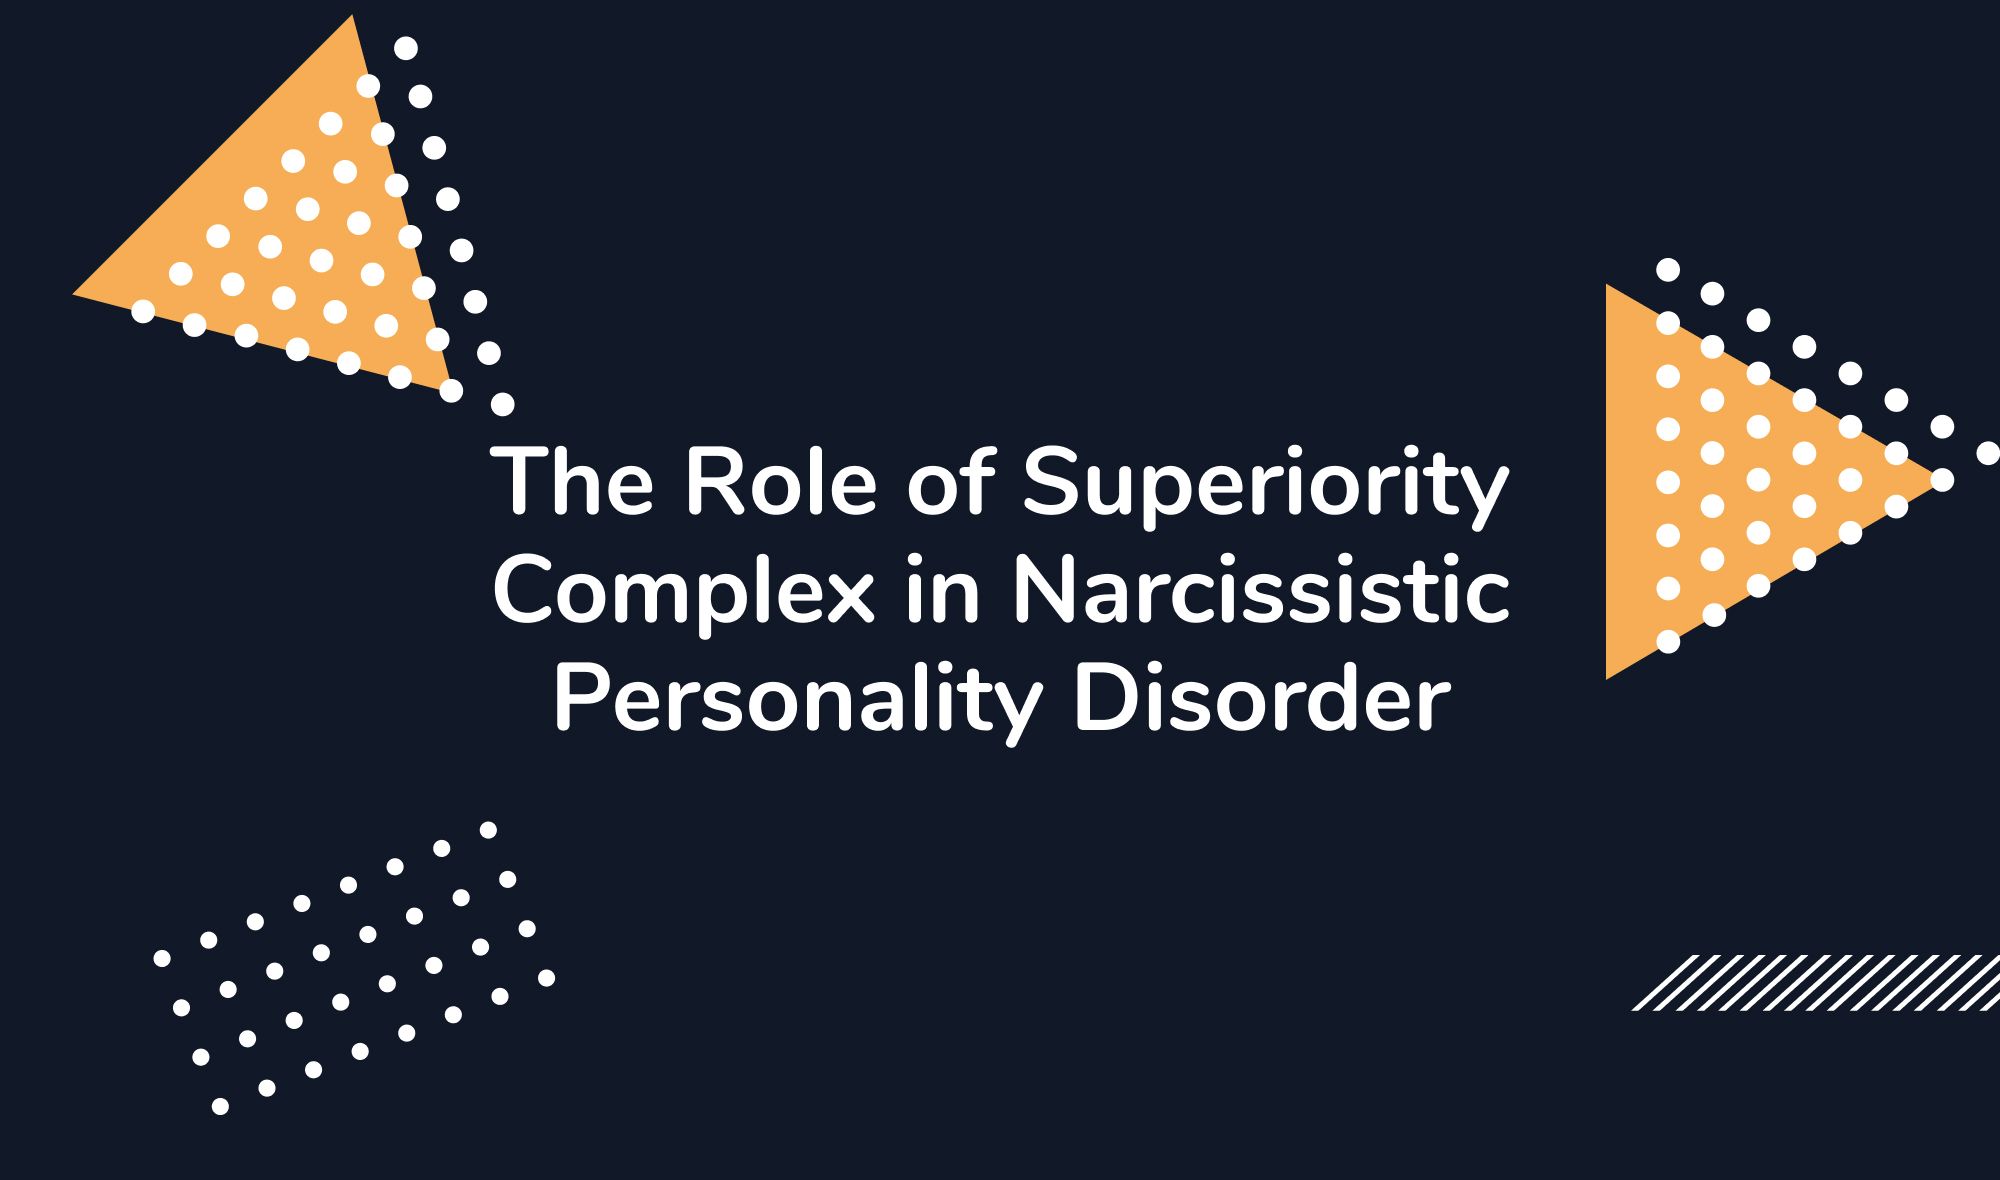 The Role of Superiority Complex in Narcissistic Personality Disorder